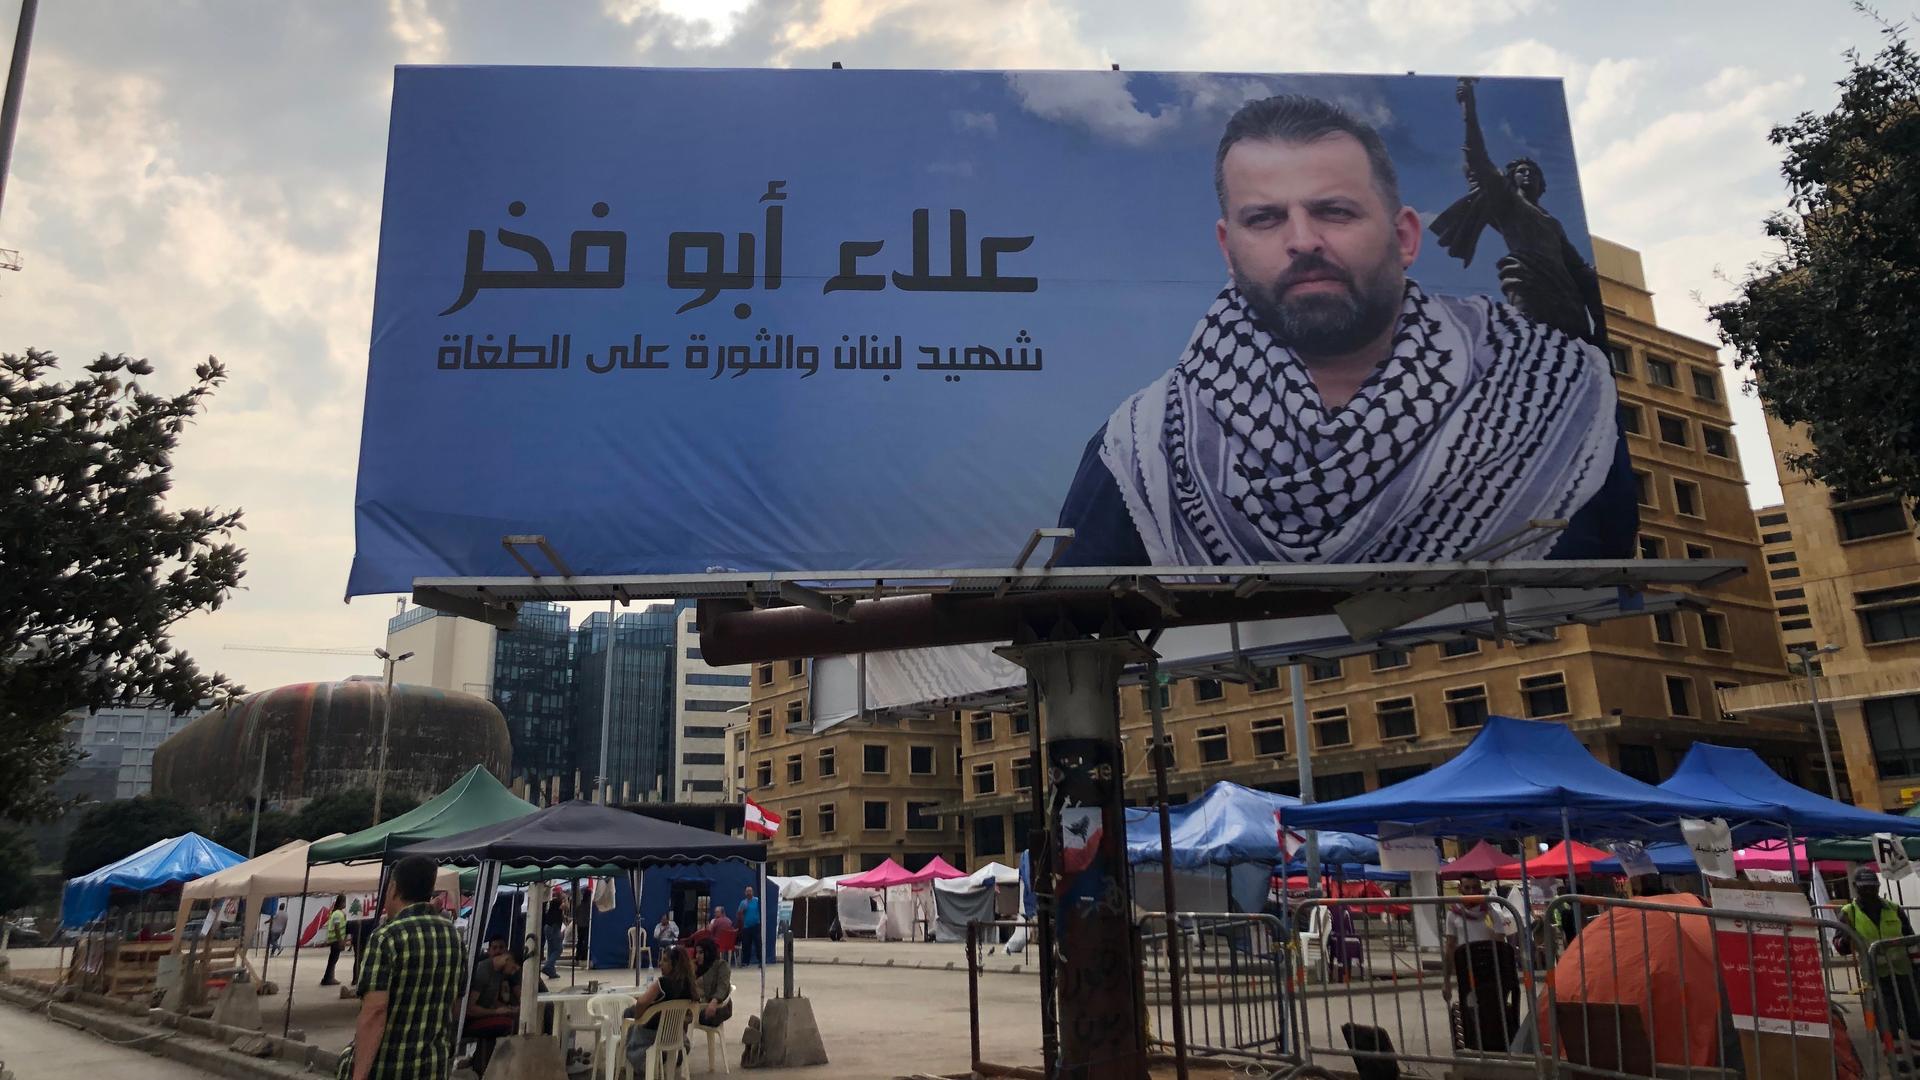 Vendors and civil society tents set up in Martyrs' Square under the photo of man who was killed during a roadblock in a suburb of Beirut.